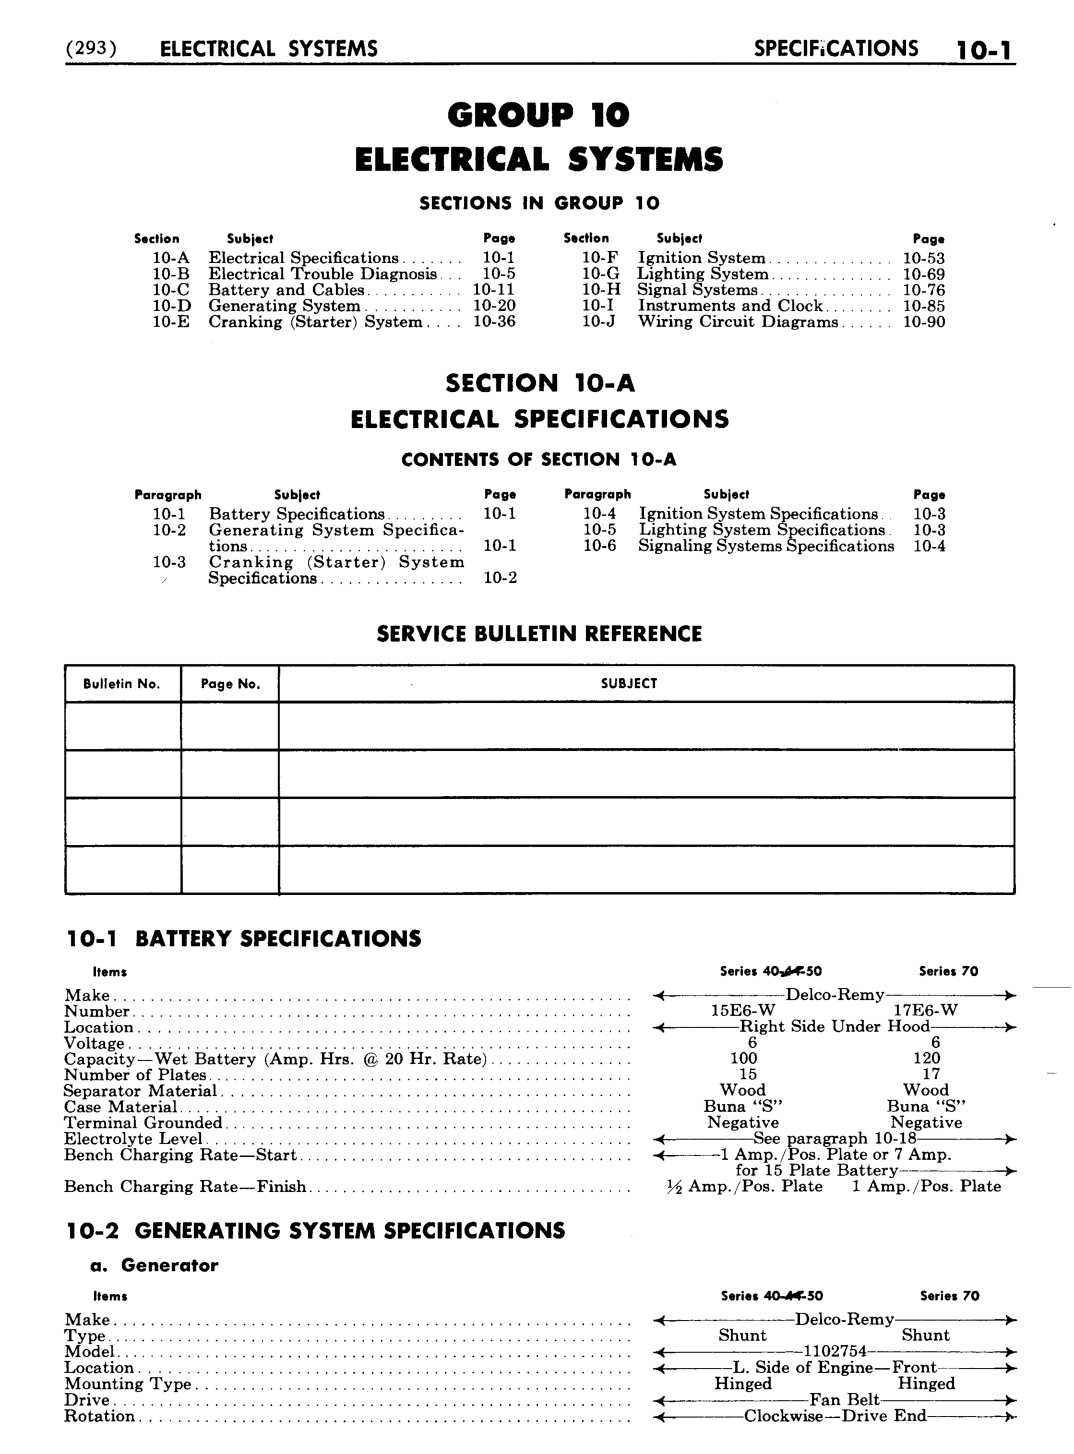 n_11 1951 Buick Shop Manual - Electrical Systems-001-001.jpg